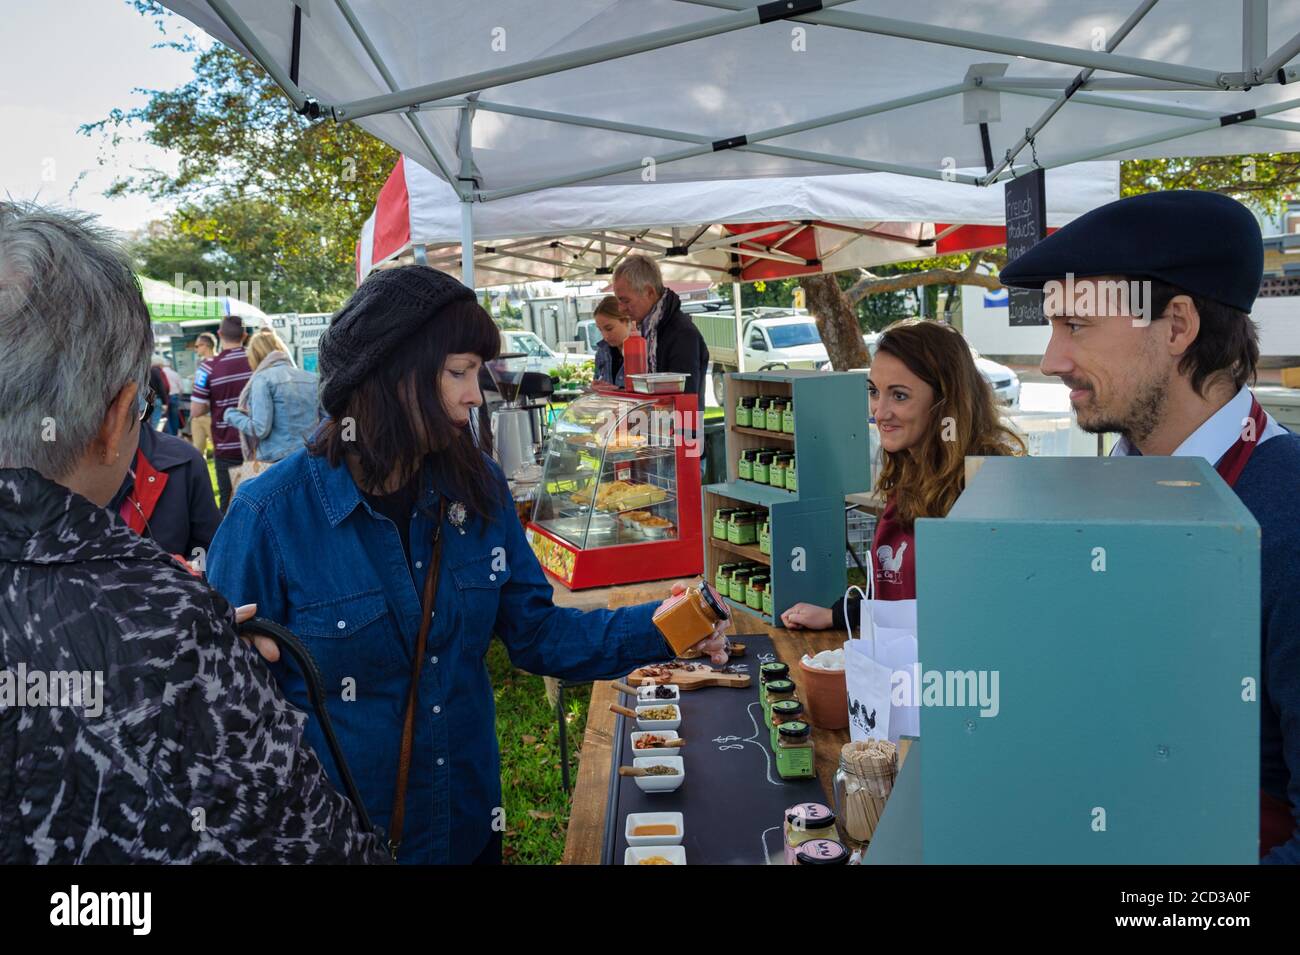 View of local market at Victor Harbour in South Australia as two tourist pay for and receive change for condiments purchased from two vendors. Stock Photo